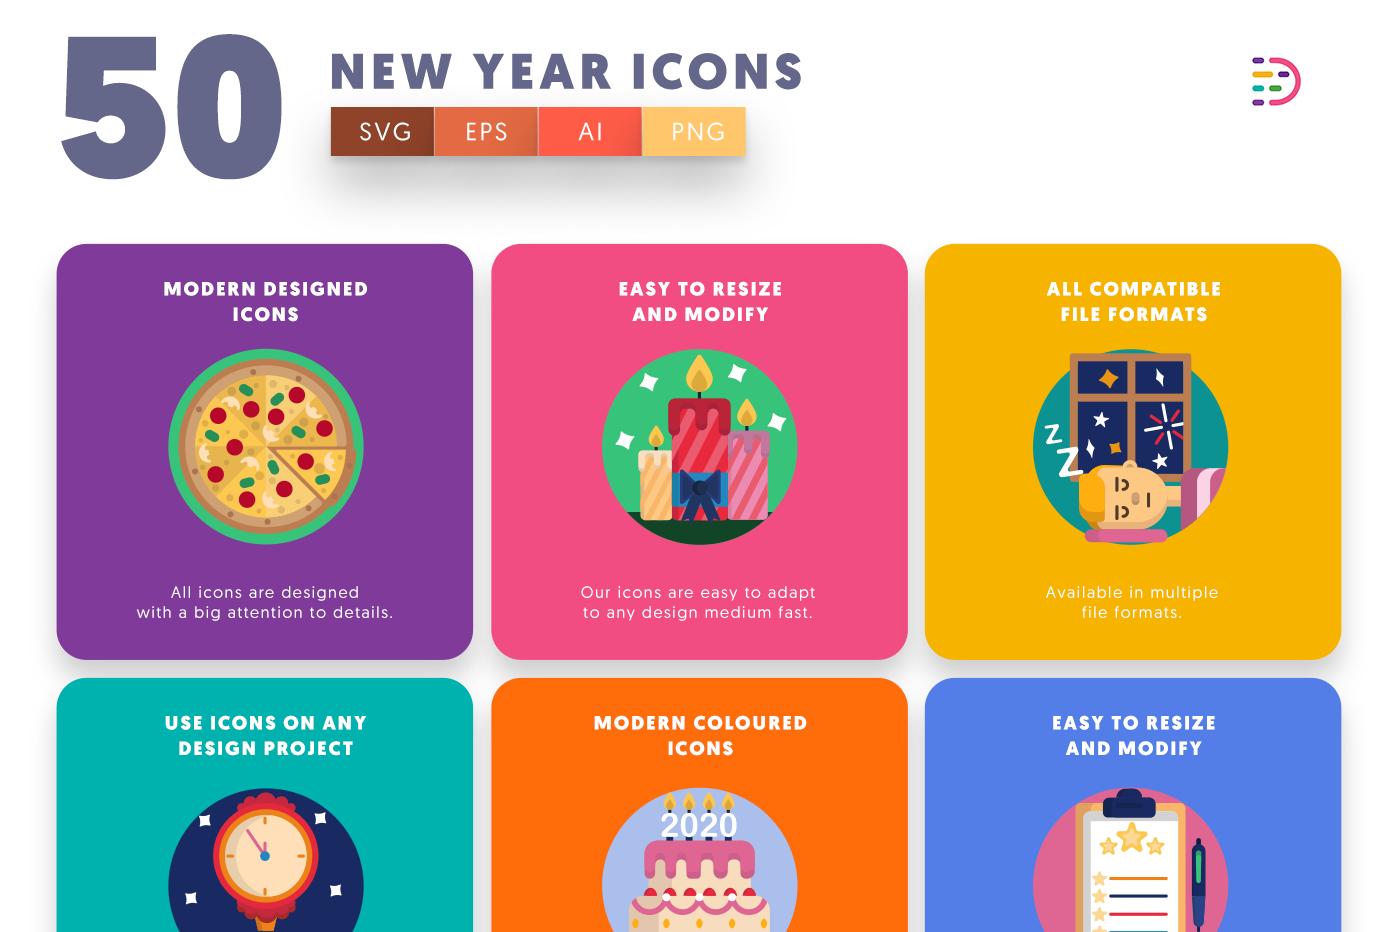  New Year Icons with colored backgrounds